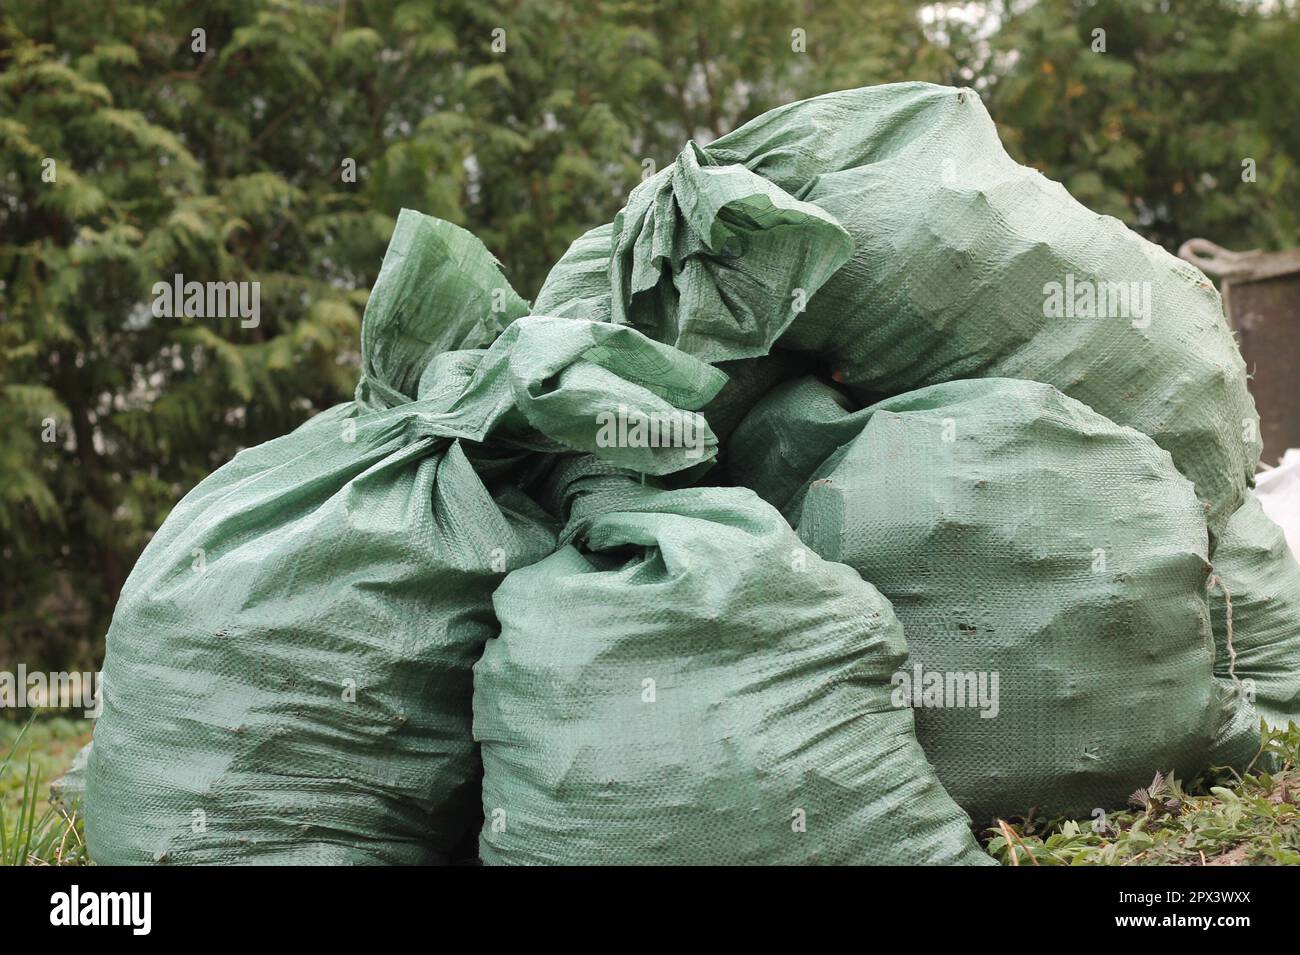 https://c8.alamy.com/comp/2PX3WXX/pile-of-green-plastic-free-ecological-trash-bags-on-dump-outdoors-segregation-sorting-and-recycling-of-garbage-volunteer-action-clean-the-planet-2PX3WXX.jpg